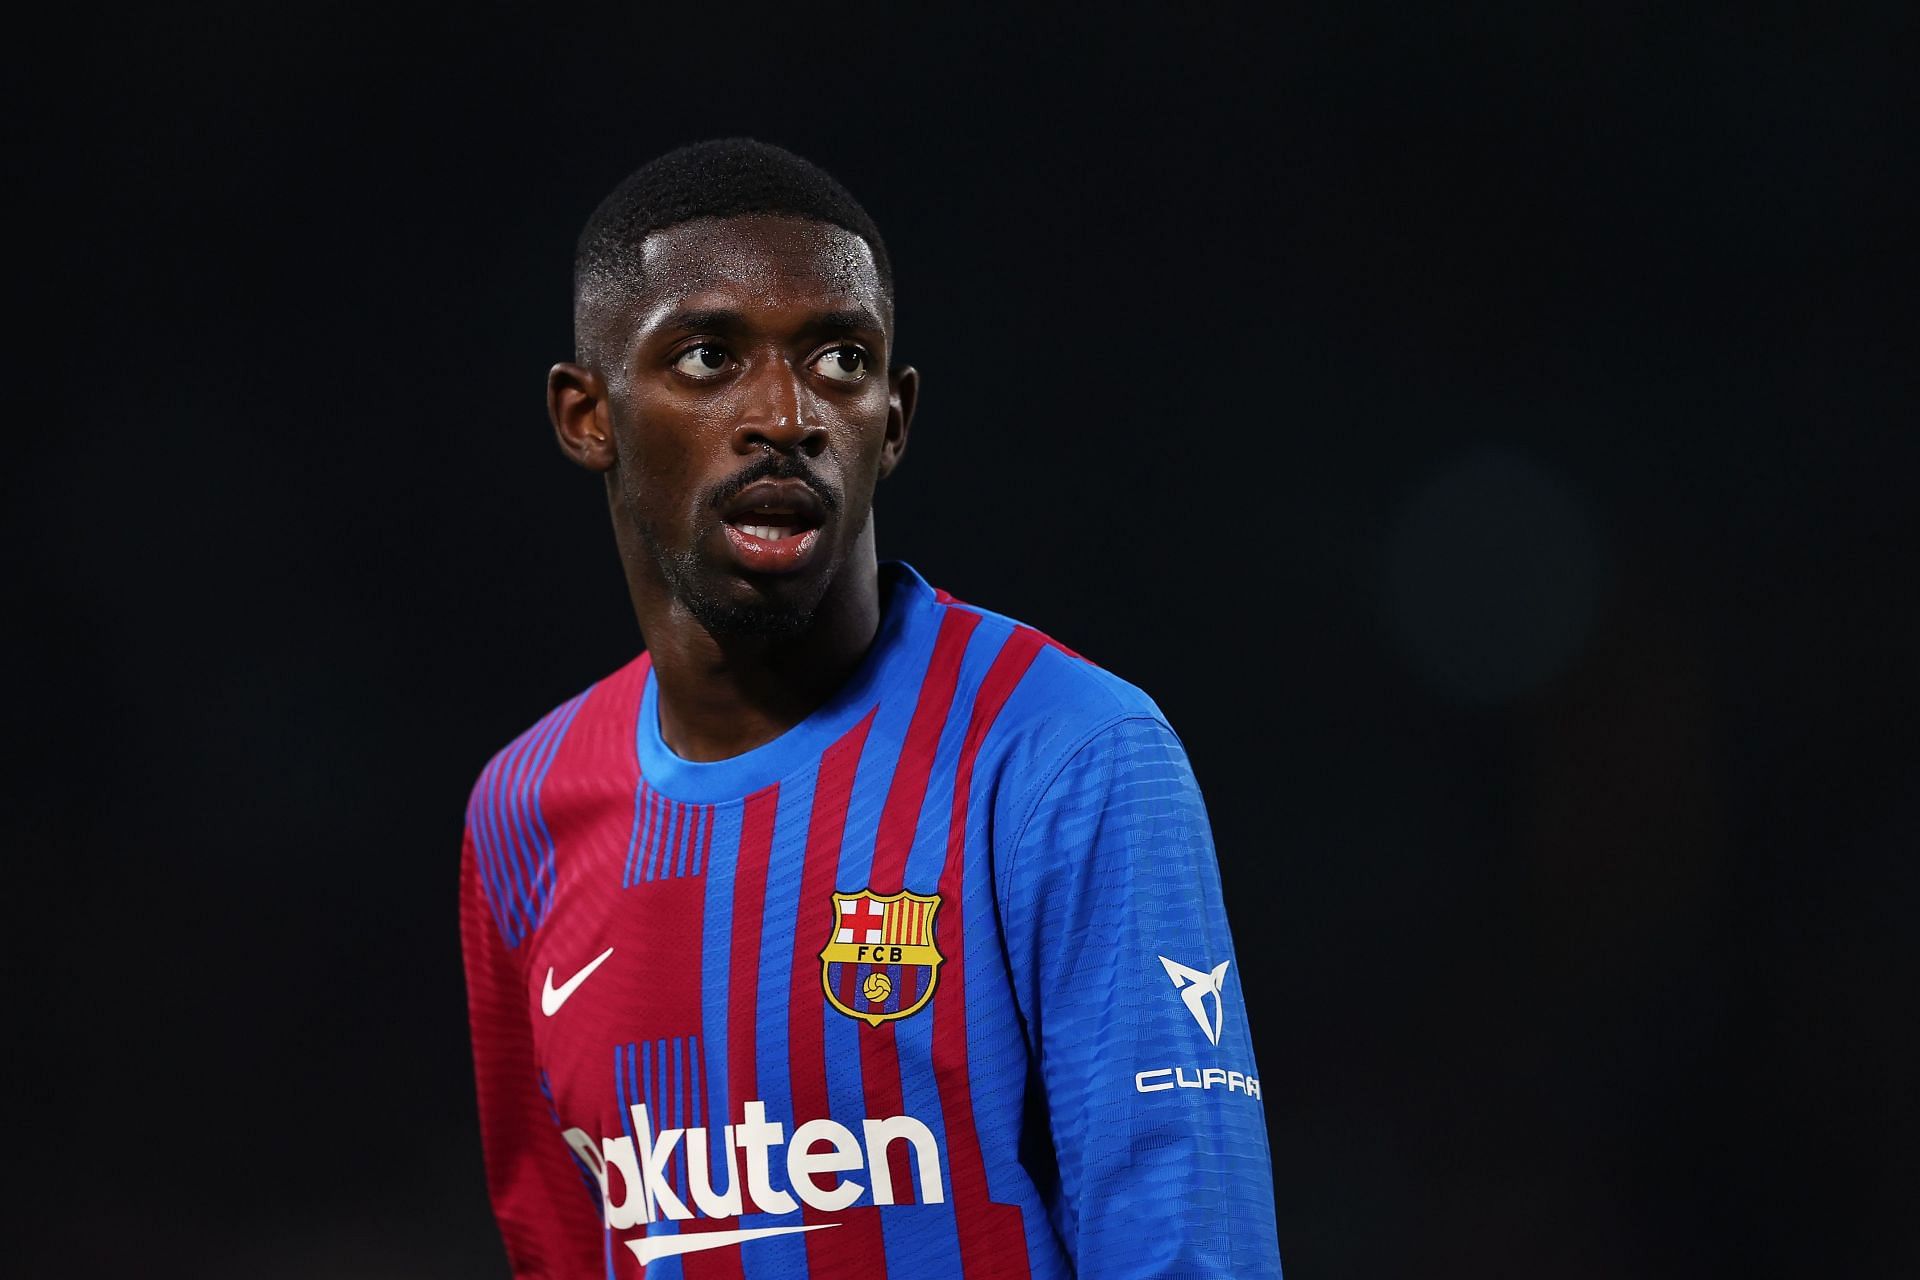 Dembele is currently a free agent